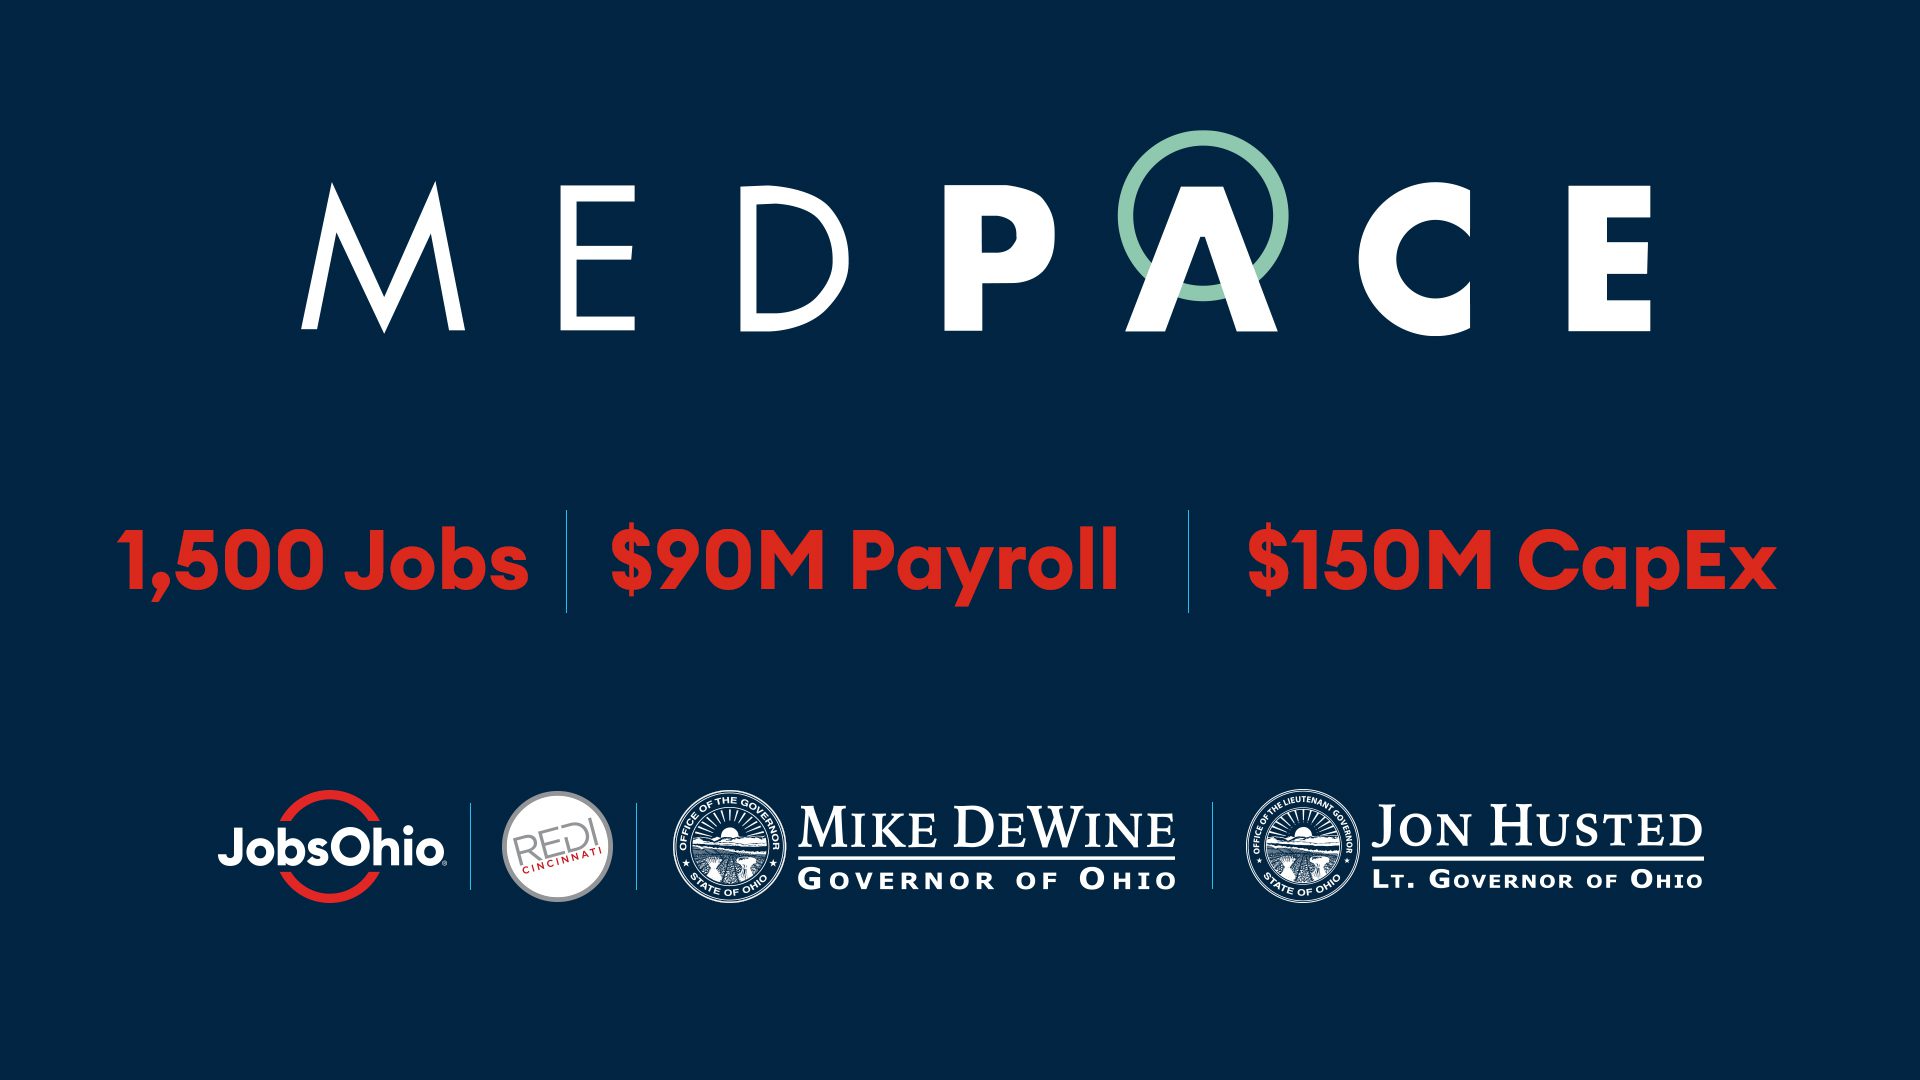 Medpace Announcement Graphic